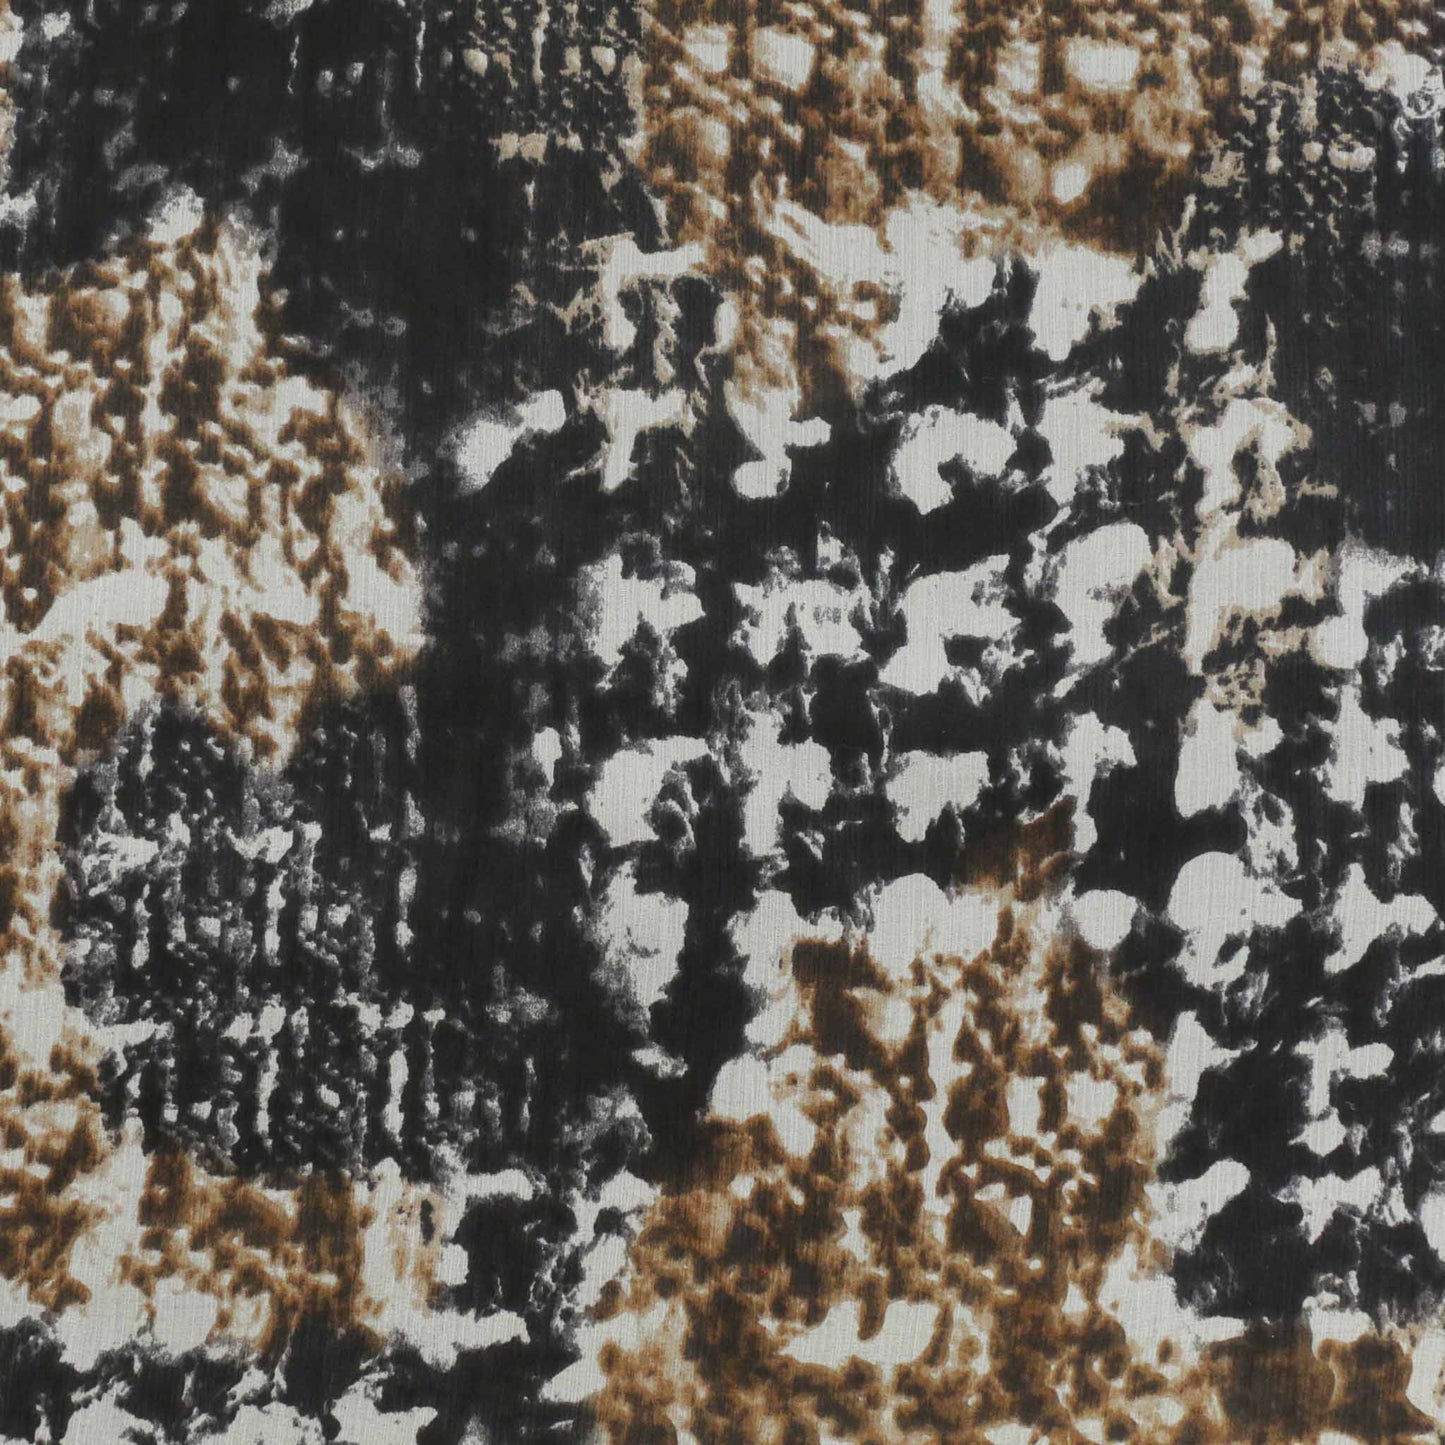 beige and black chiffon silk dressmaking fabric with crinkle effect texture and animal skin print